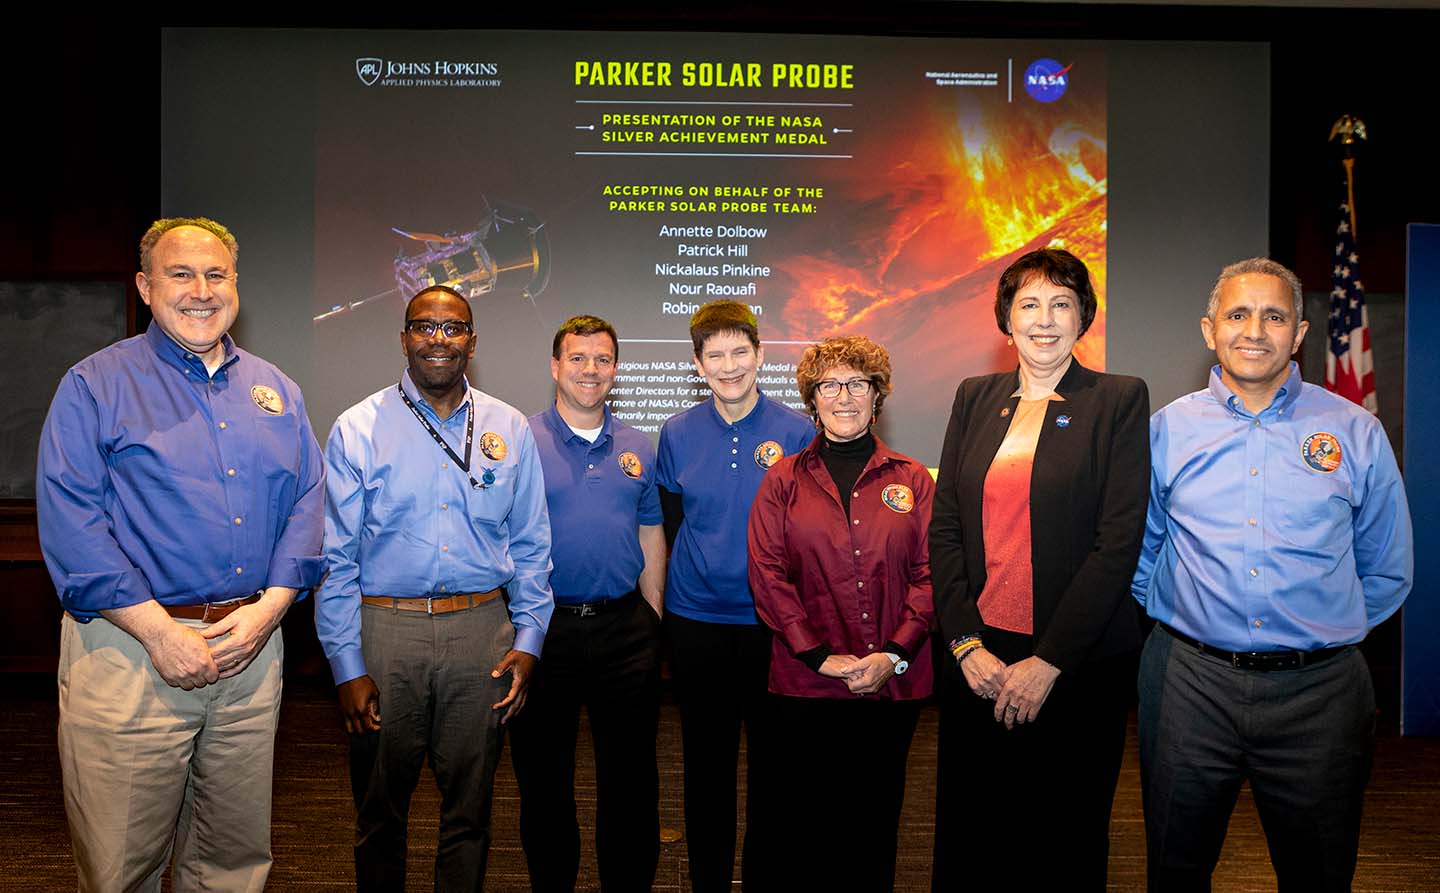 Pictured left to right: Andy Driesman, APL, previous project manager; Patrick Hill, APL, current project manager; Nickalaus Pinkine, APL, mission operations manager; Robin Vaughn, APL, spacecraft system engineer; Annette Dolbow, APL, integration and testing lead engineer; Nicky Fox, NASA Heliophysics Division director; and Nour Raouafi, APL, project scientist